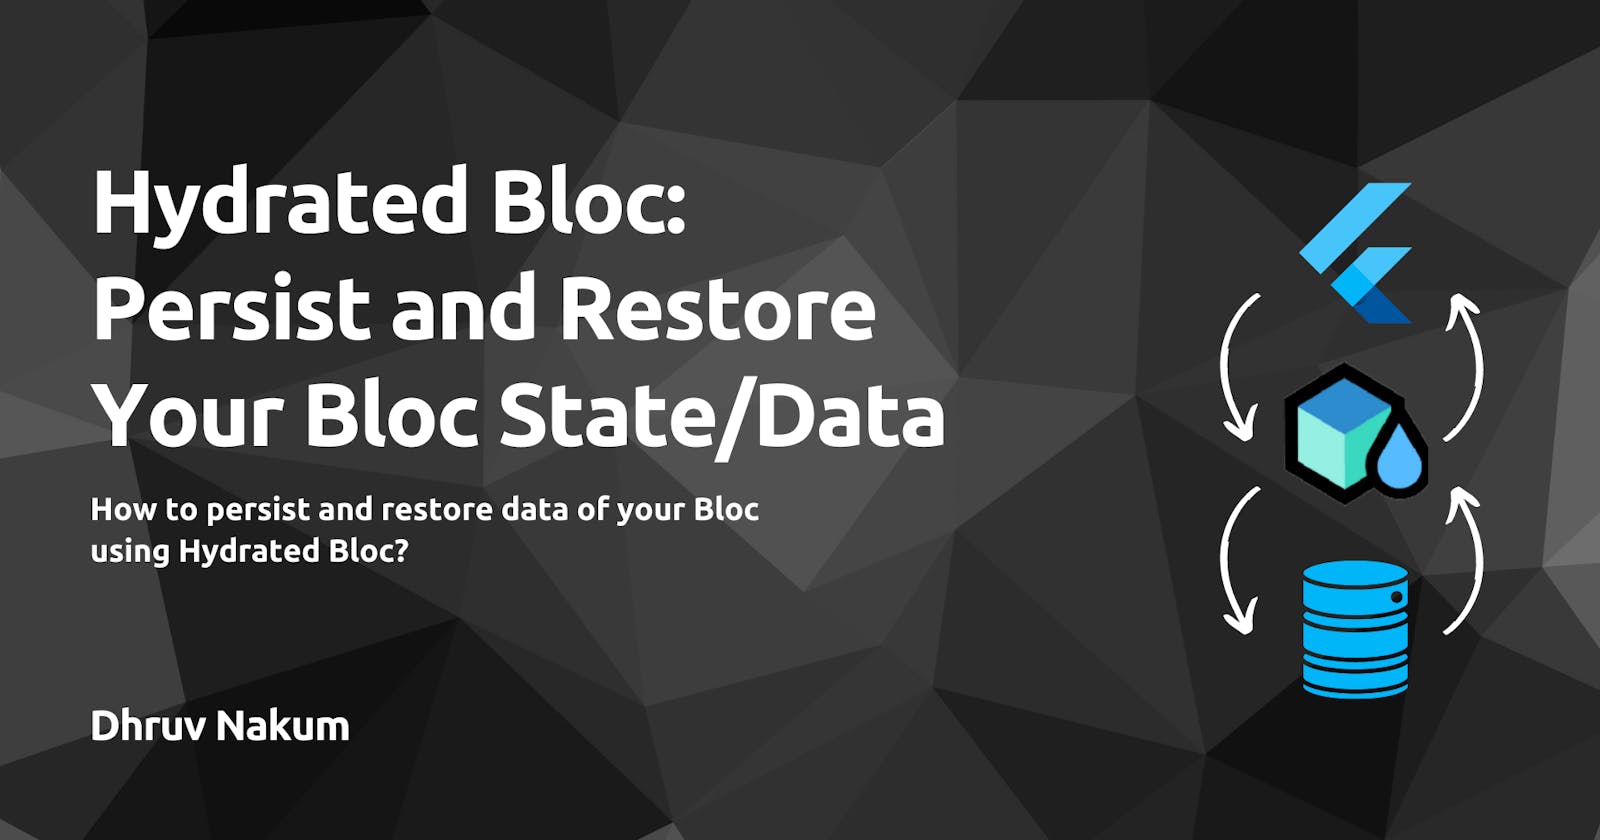 Hydrated Bloc: Persist and Restore Your Bloc State/Data